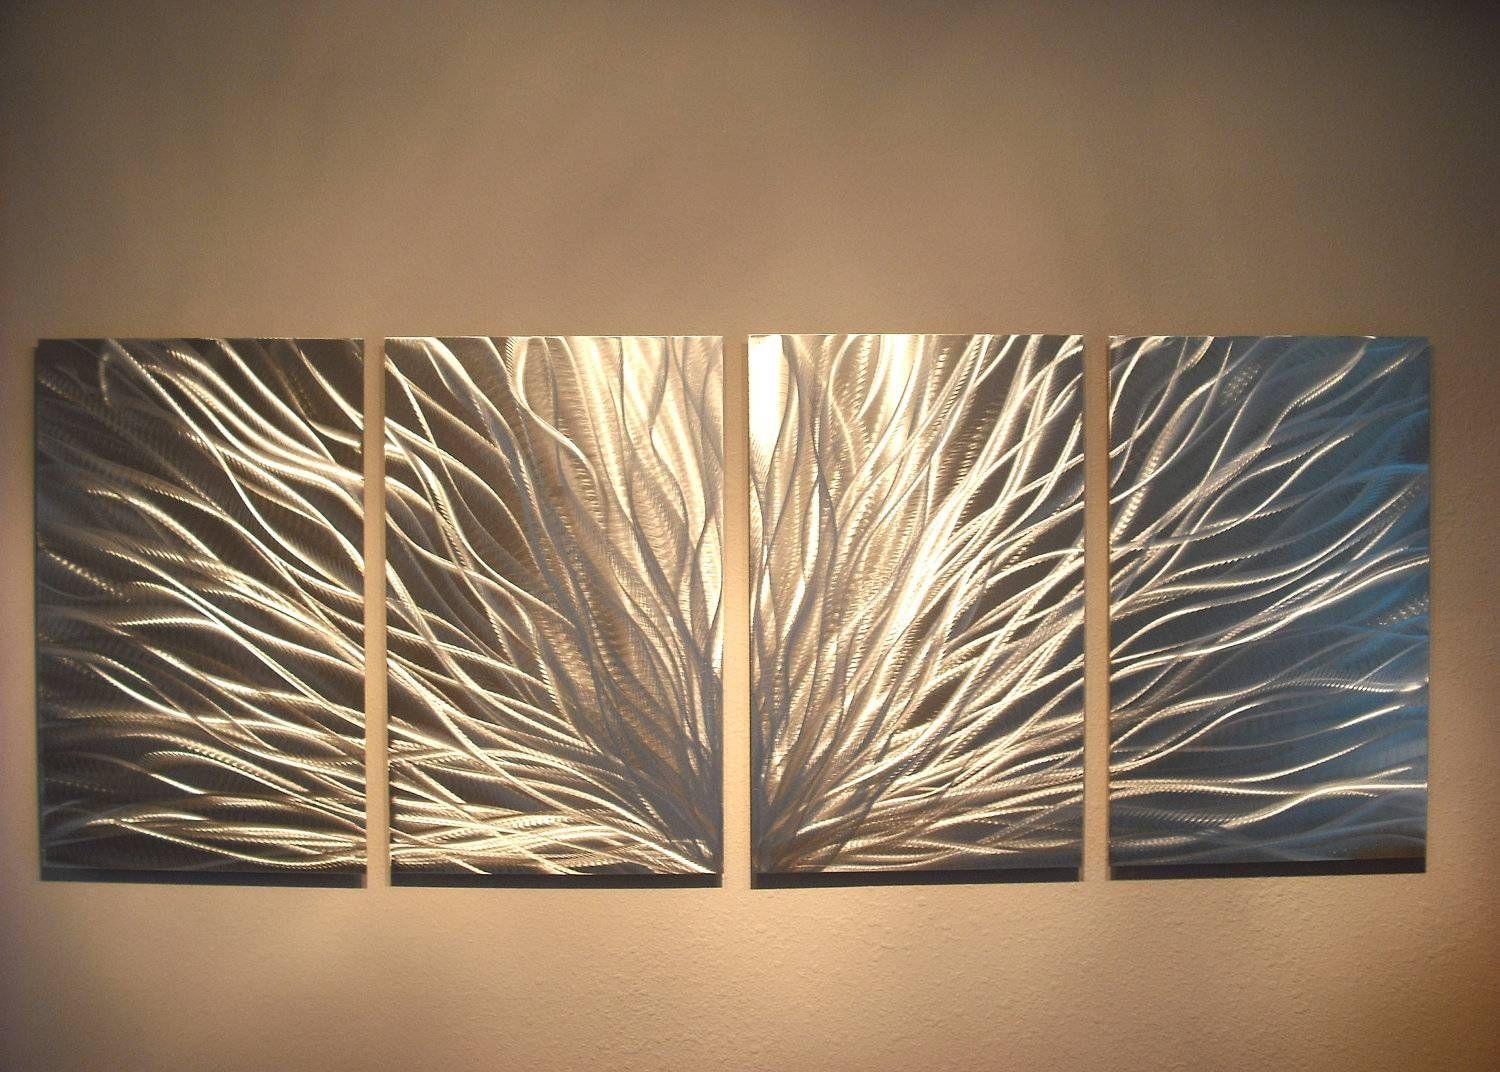 Radiance – Abstract Metal Wall Art Contemporary Modern Decor With Most Recent Decorative Metal Wall Art (View 1 of 20)